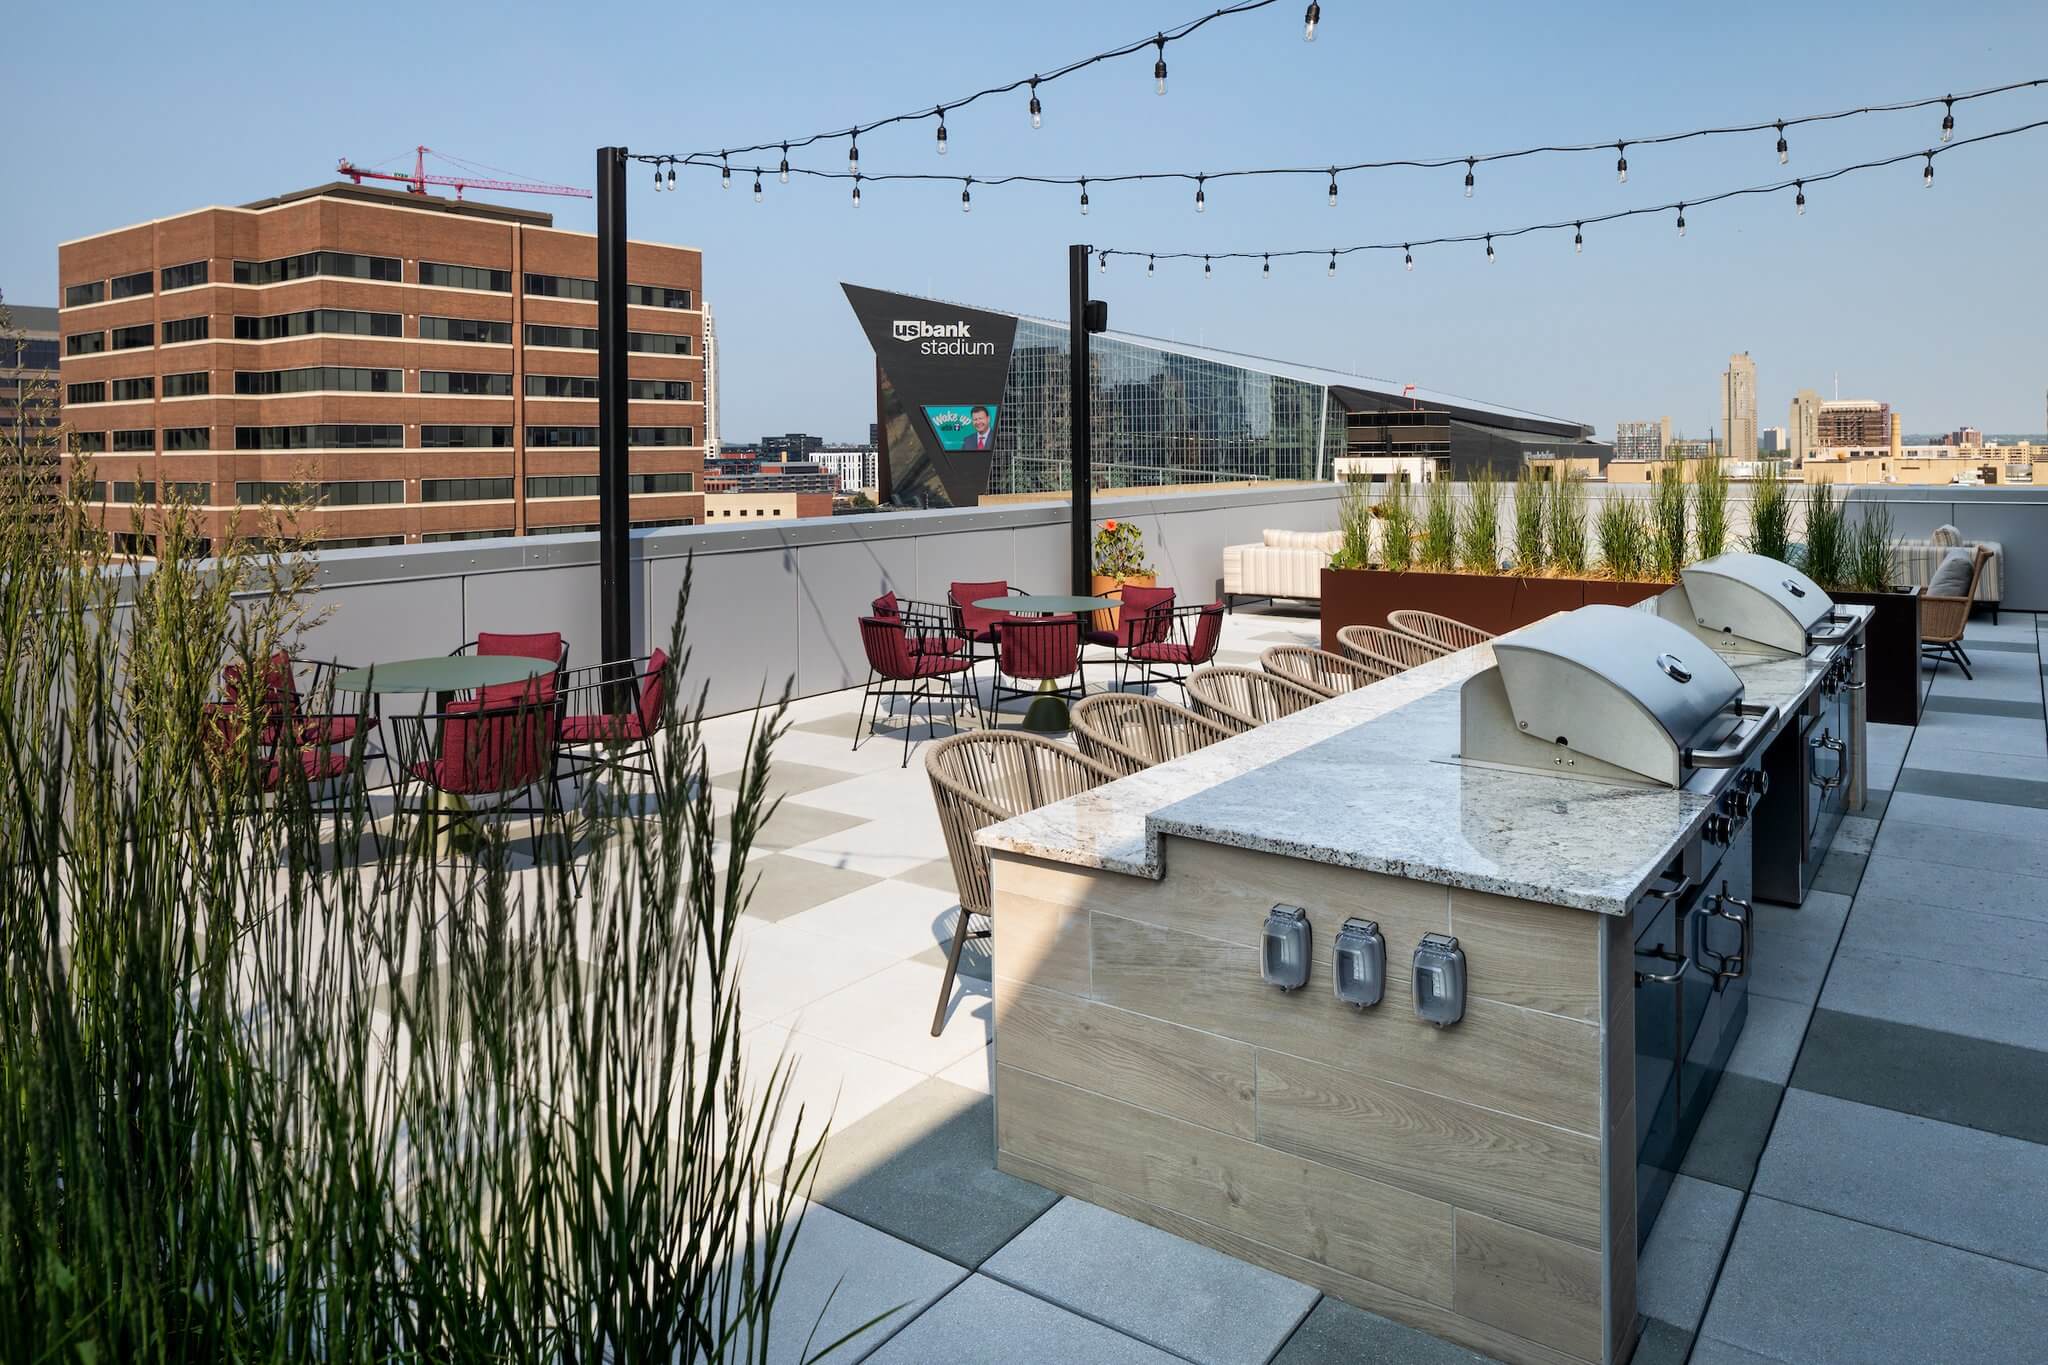 Moment apartments rooftop lounge amenity with views of the U.S. Bank Stadium